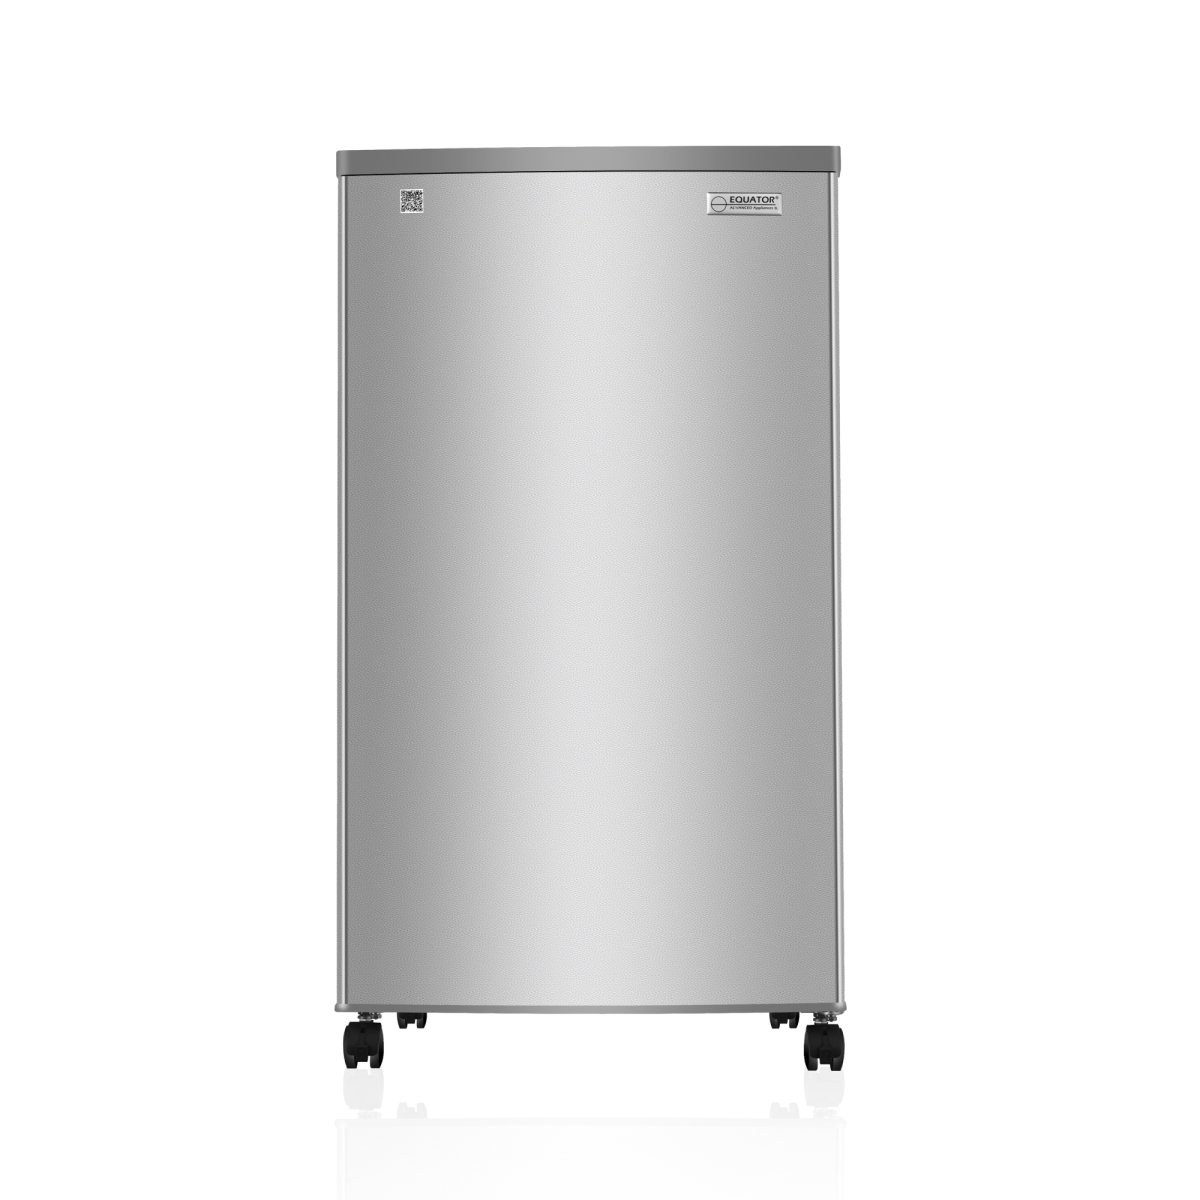 Picture of Equator Advanced Appliances OR 400 Equator Advanced Appliances 3.5 cu.ft. Outdoor Refrigerator OR400